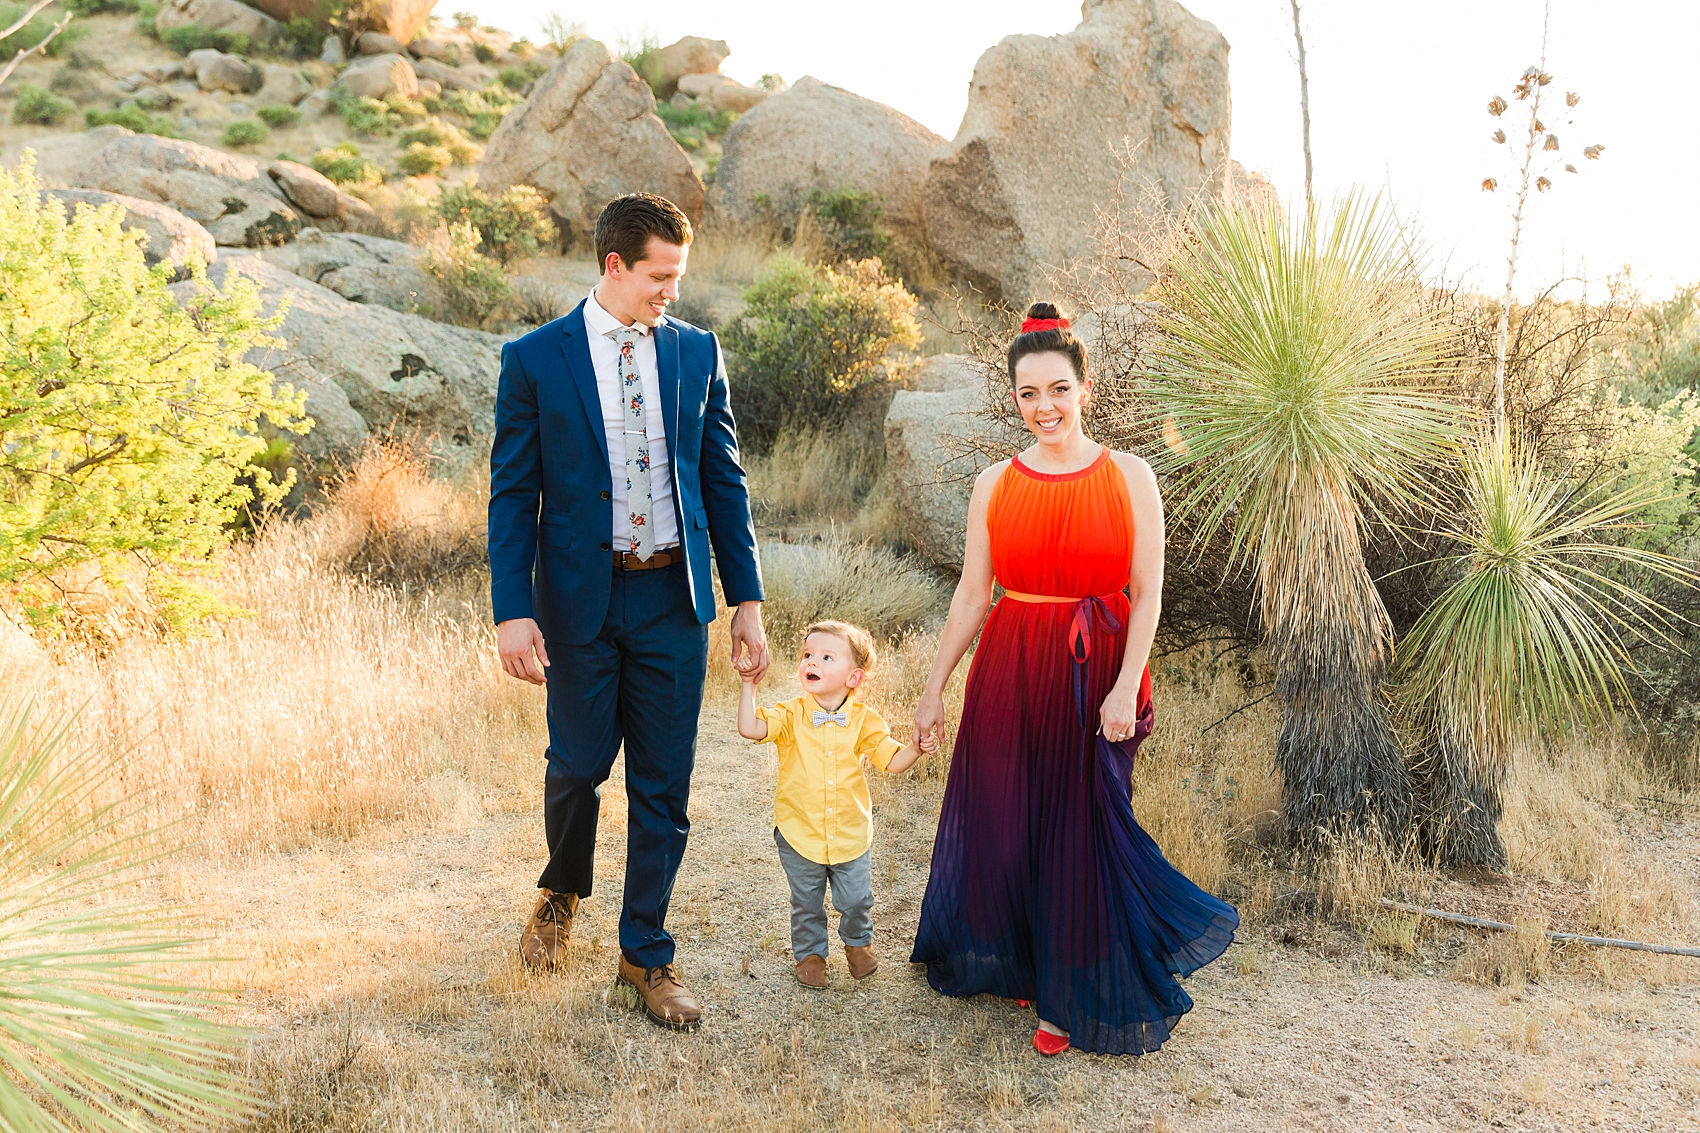 Leah Hope Photography | Scottsdale Phoenix Arizona Family Photos | Desert Landscape Cactus Scenery Boulders | Family Pictures | What to Wear | Family Posing Poses | Scottsdale Photographer | Family Child Photographer | Outfits and Styling | Sunset Colors Bold Dress